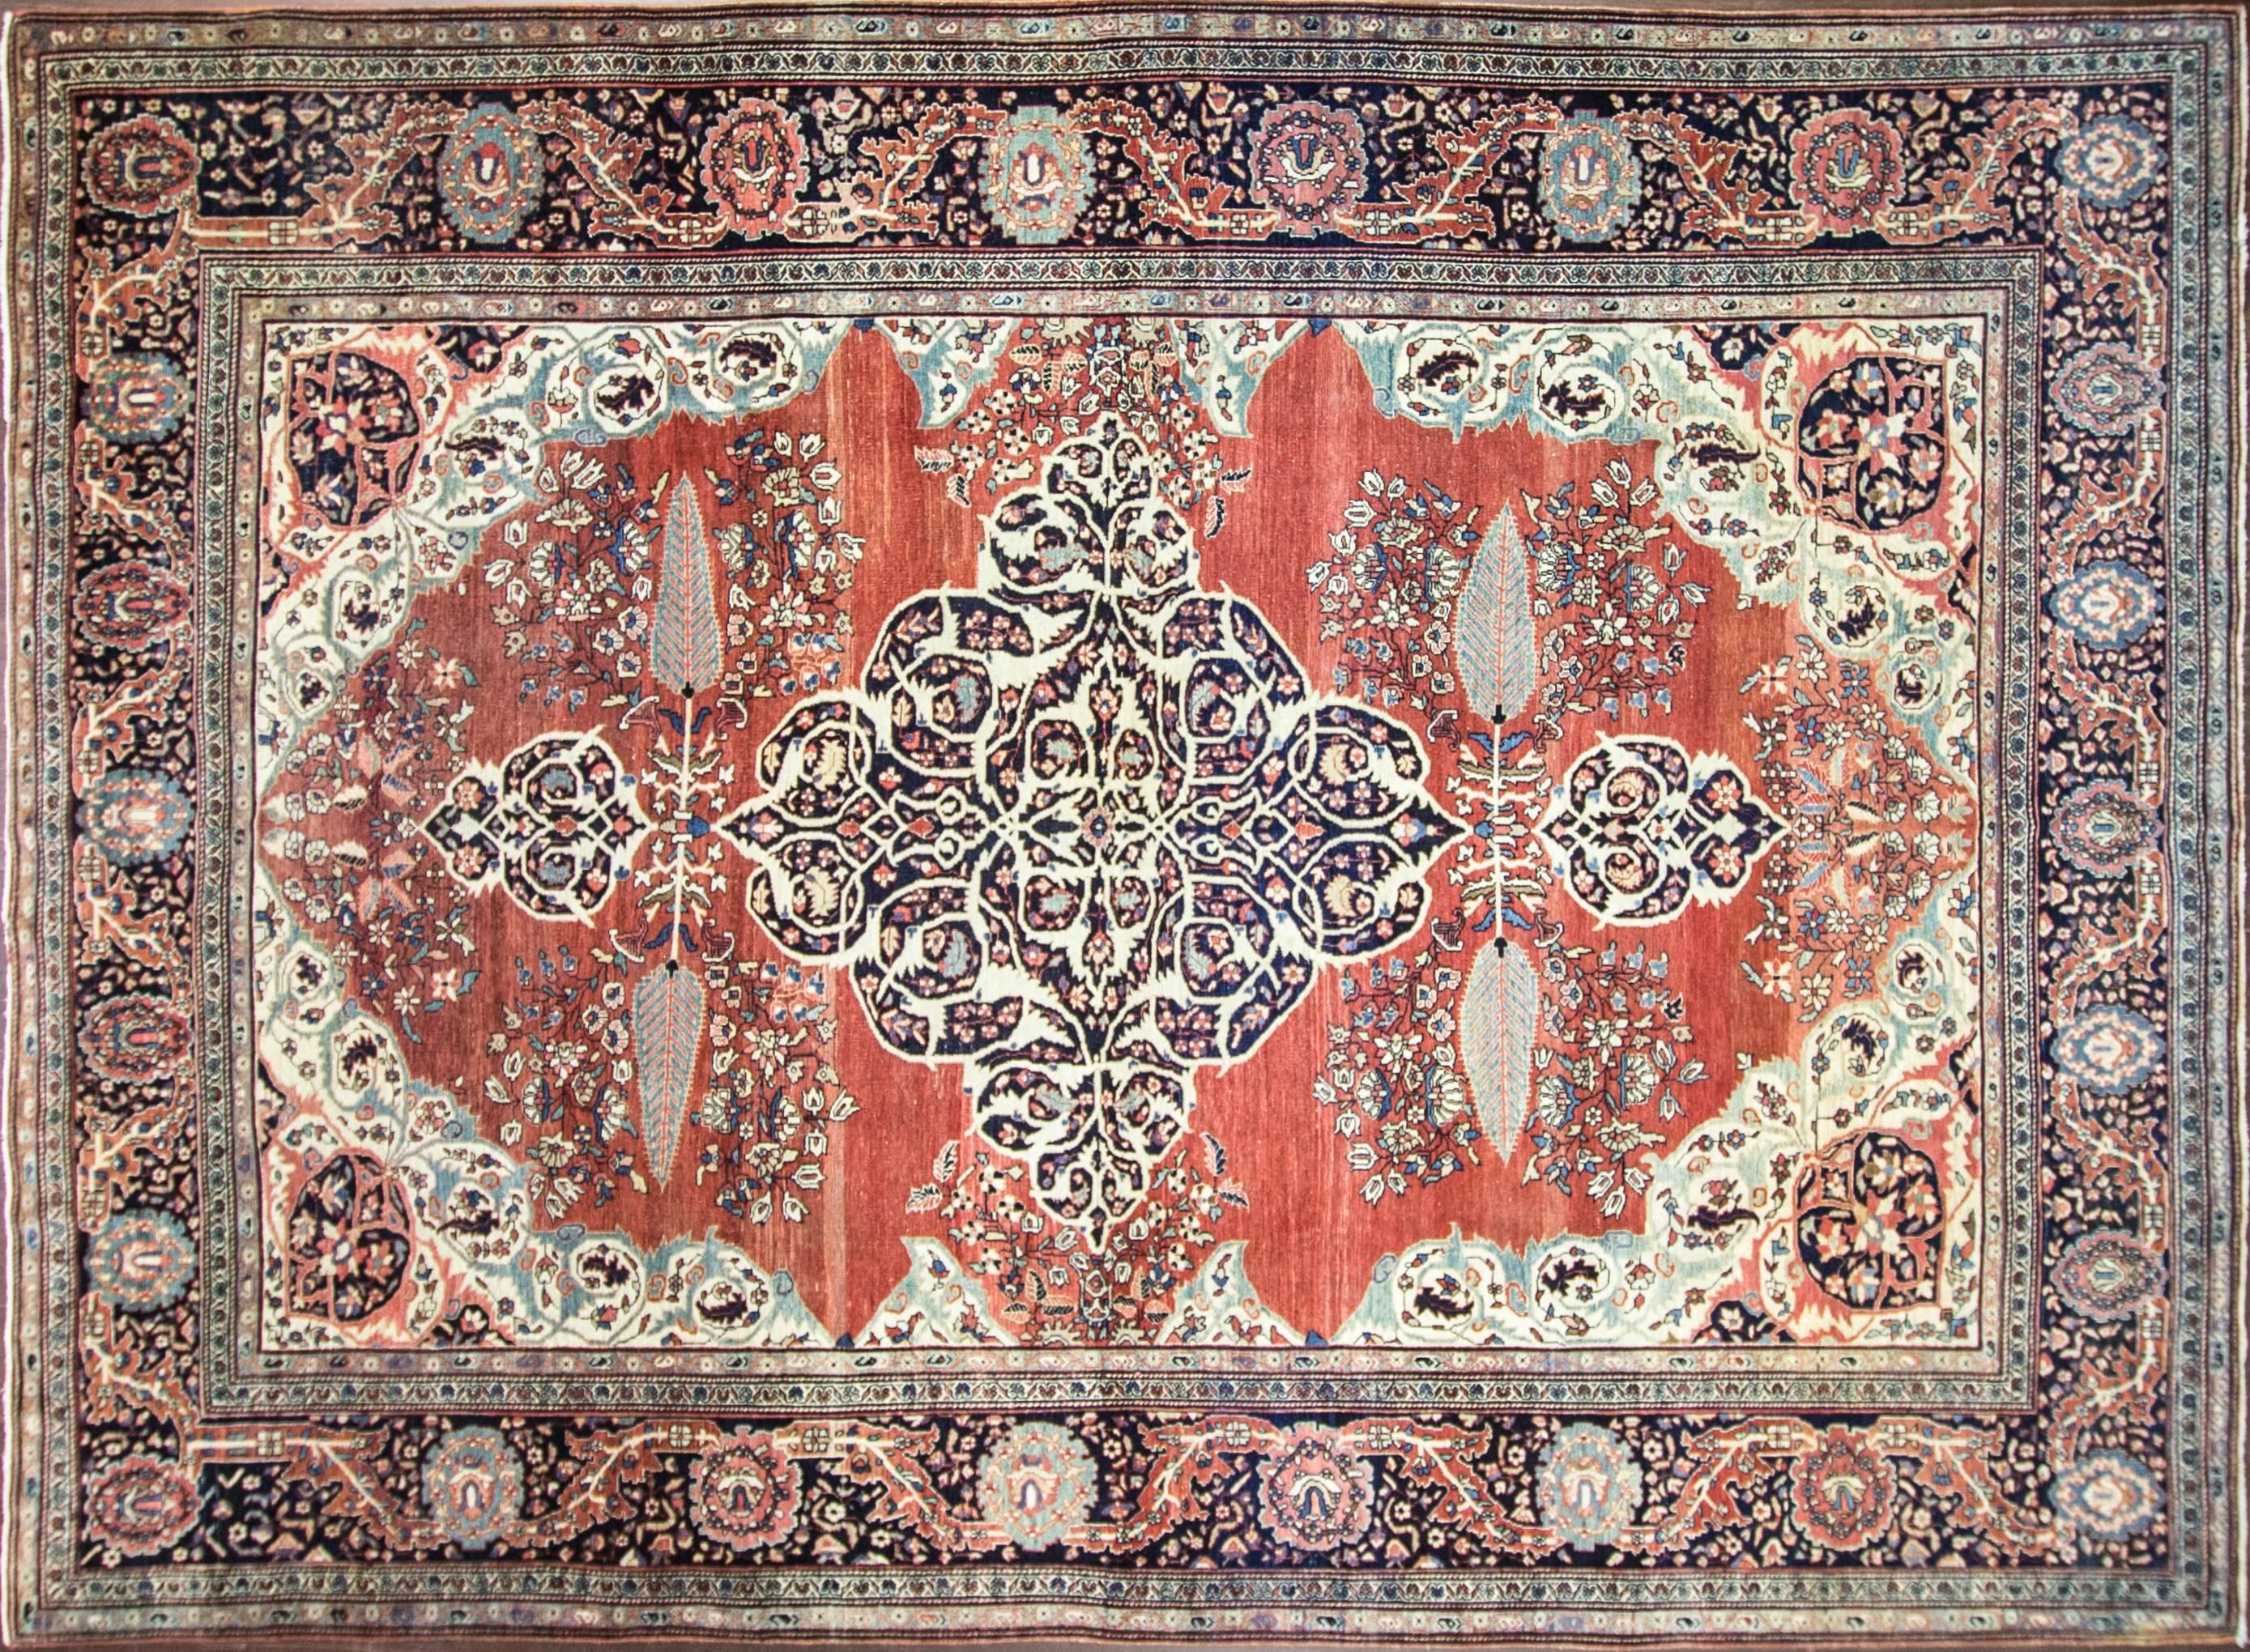 Feraghans were made between the 1870s and 1913 from a region north of the town of Arak, produced for the Persian aristocracy. They are single wefted, long and narrow or room-sized carpets, typically with an all-over herati design or floral and